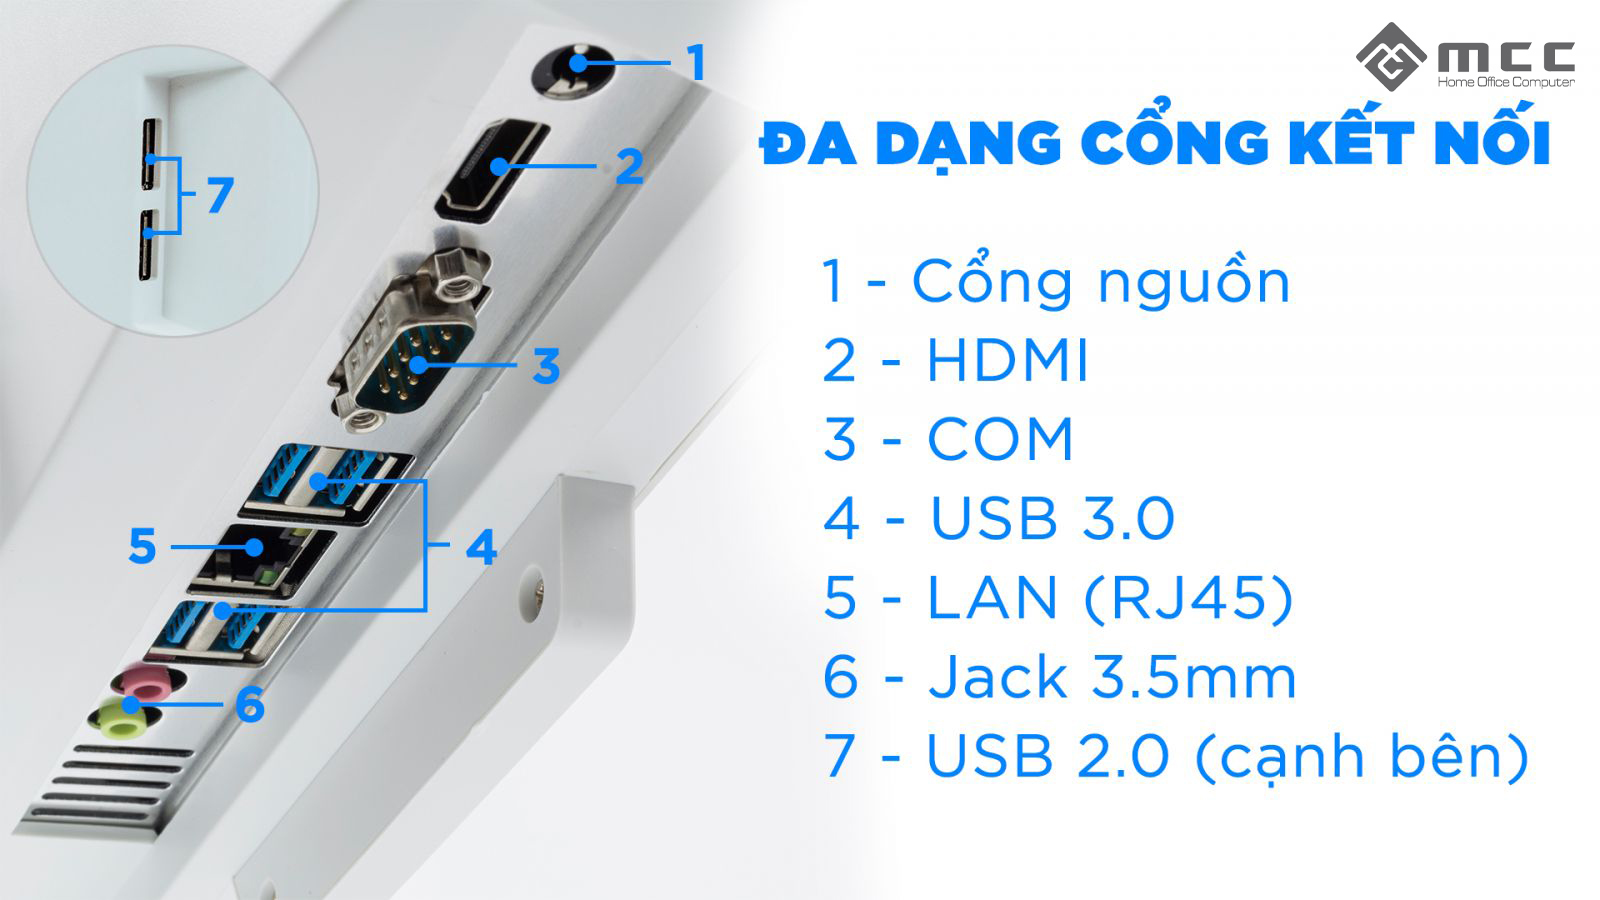 C All In One MCC 1464P4 Plus cổng kết nối